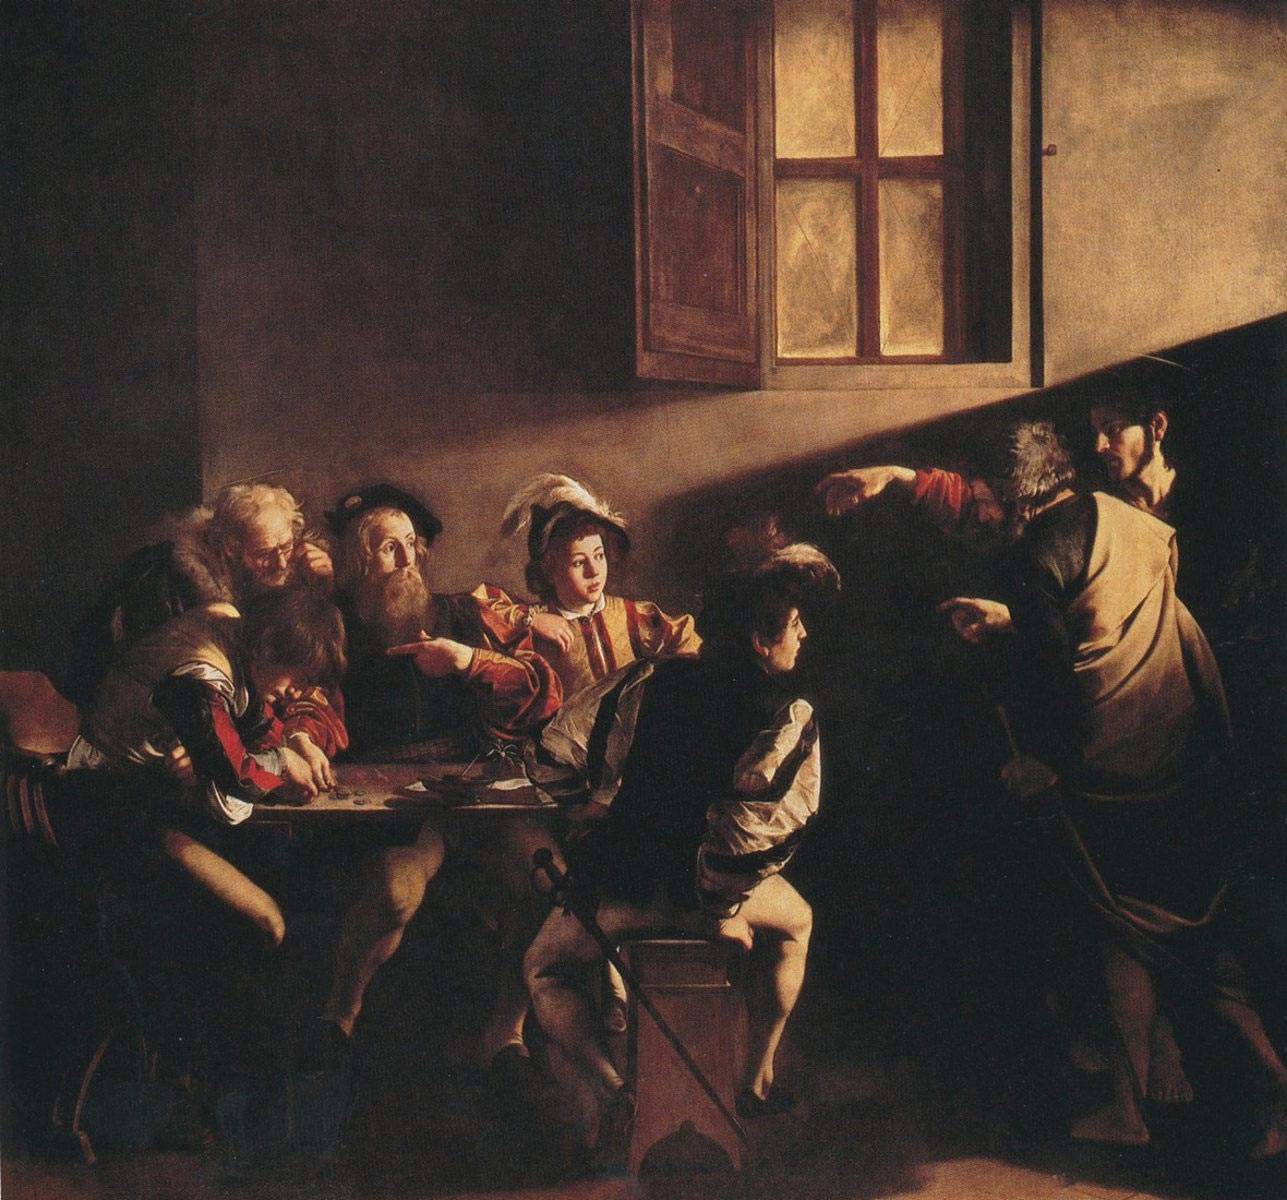 Naturalism in the 1600s, from Carracci to Caravaggio. Origins and development 